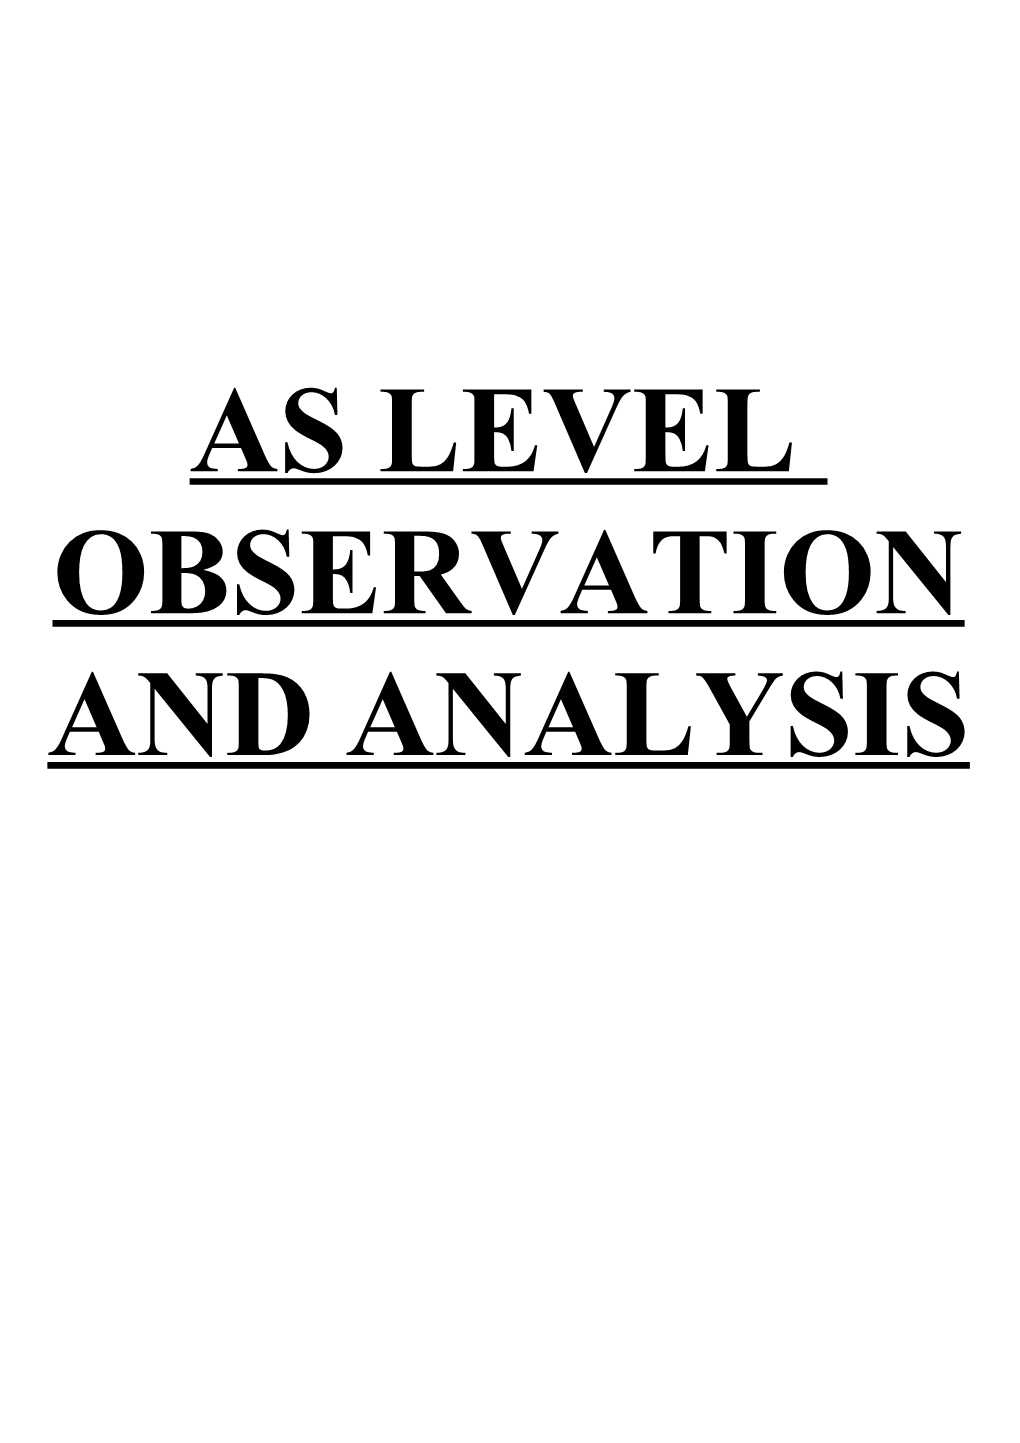 A2 Level Observation and Analysis